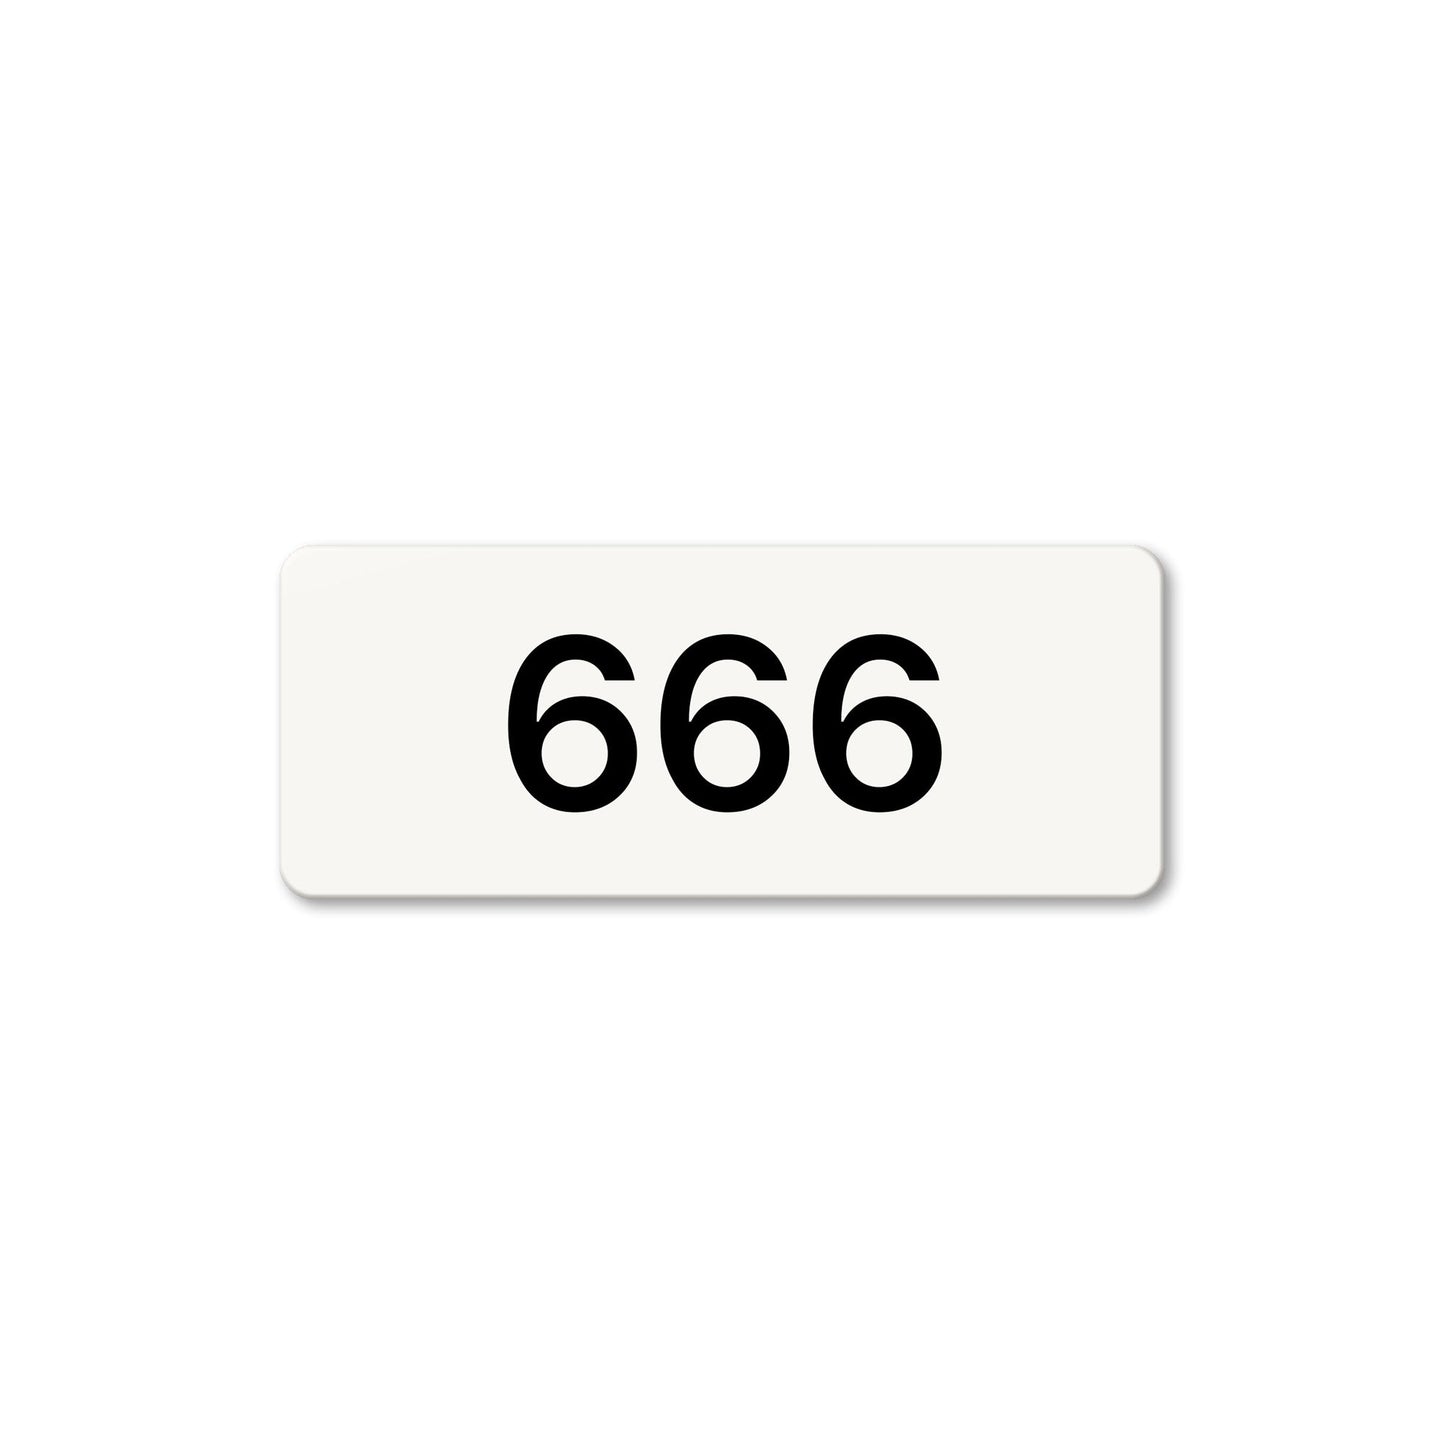 Numeral 666